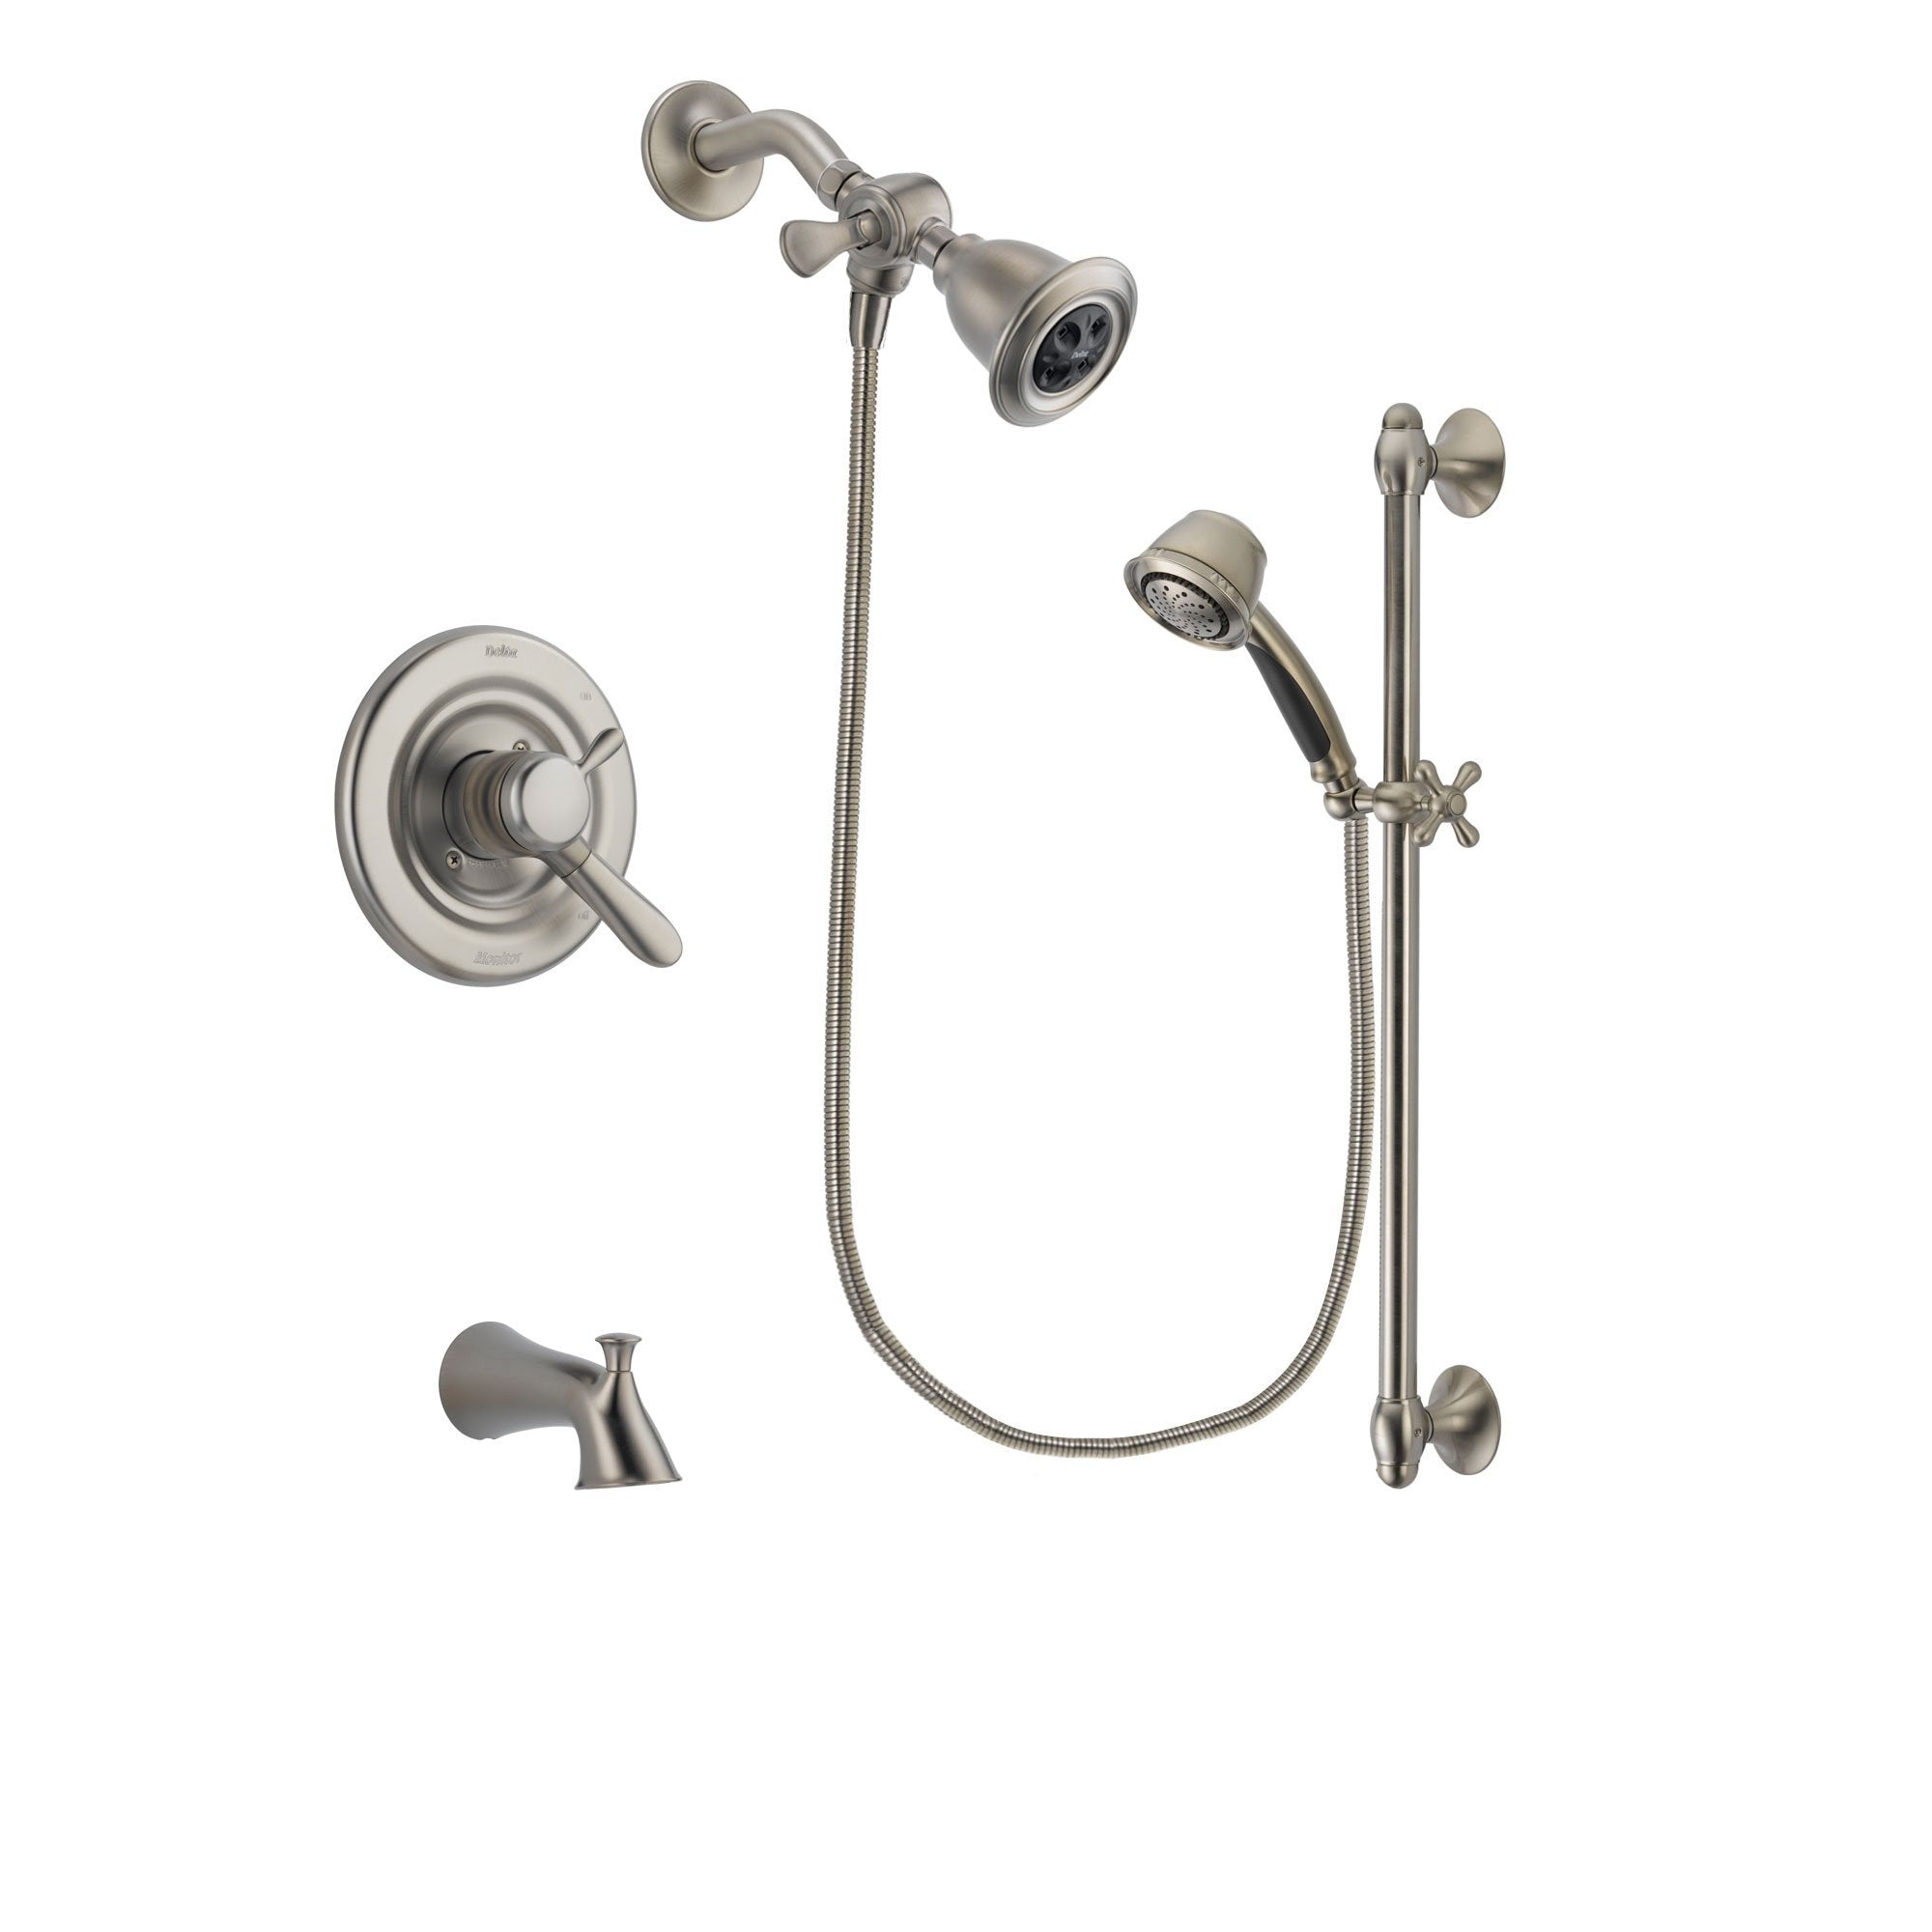 Delta Lahara Stainless Steel Finish Dual Control Tub and Shower Faucet System Package with Water Efficient Showerhead and 5-Spray Personal Handshower with Slide Bar Includes Rough-in Valve and Tub Spout DSP1295V